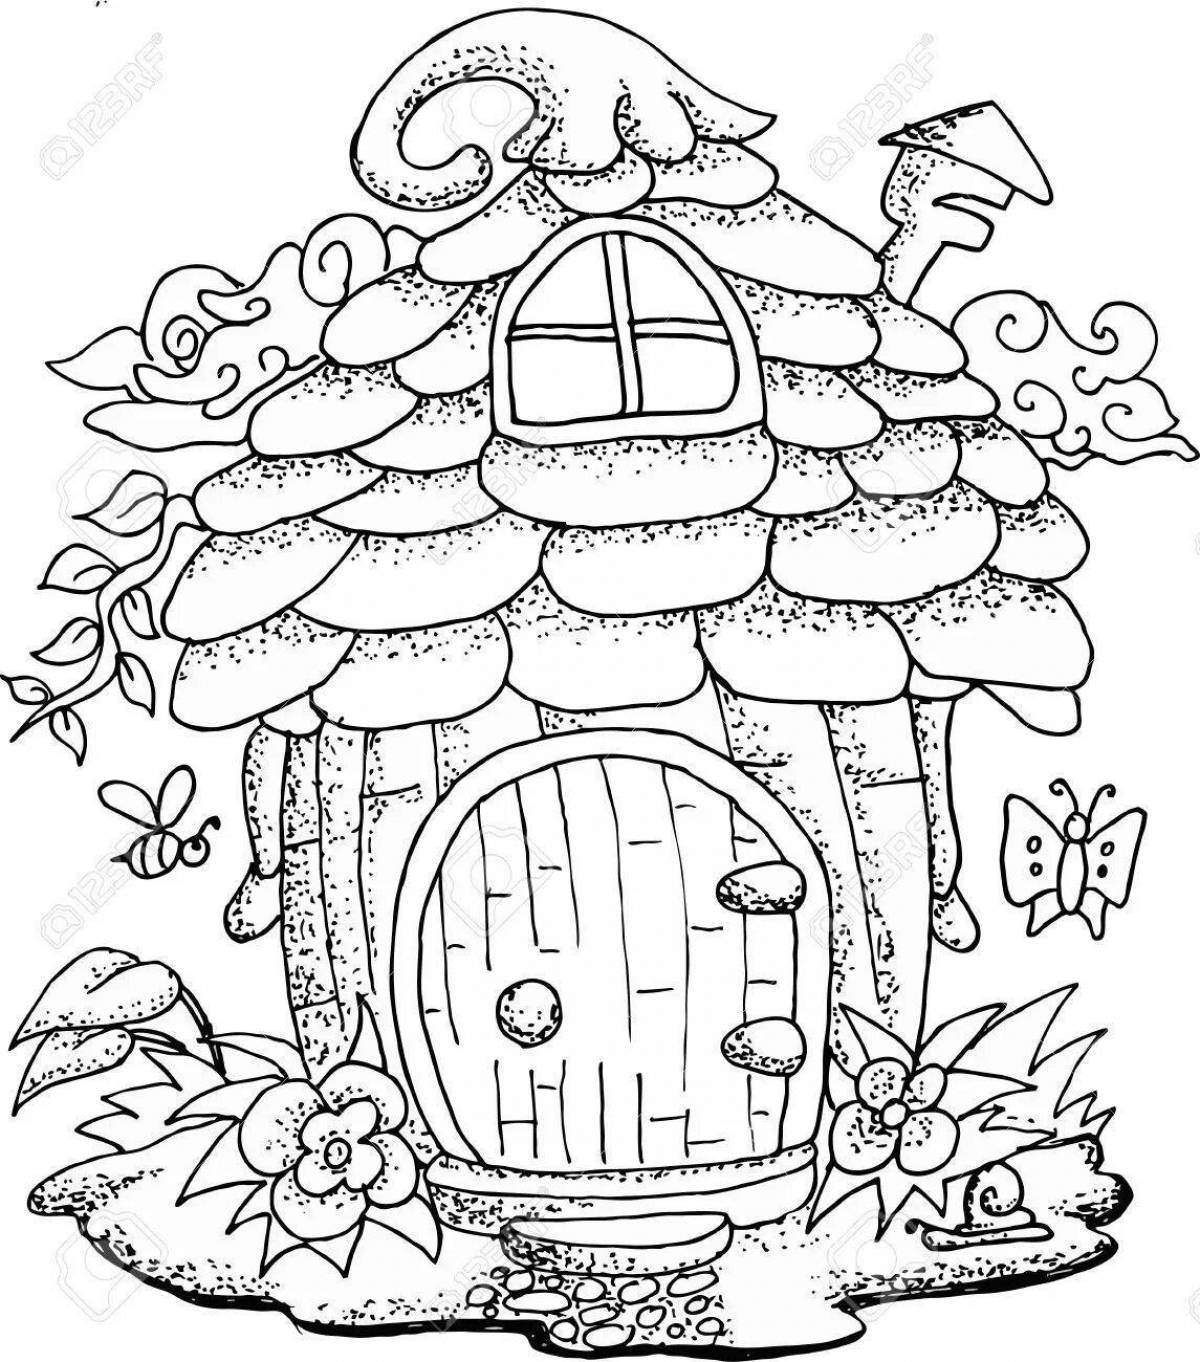 Awesome junland house coloring pages